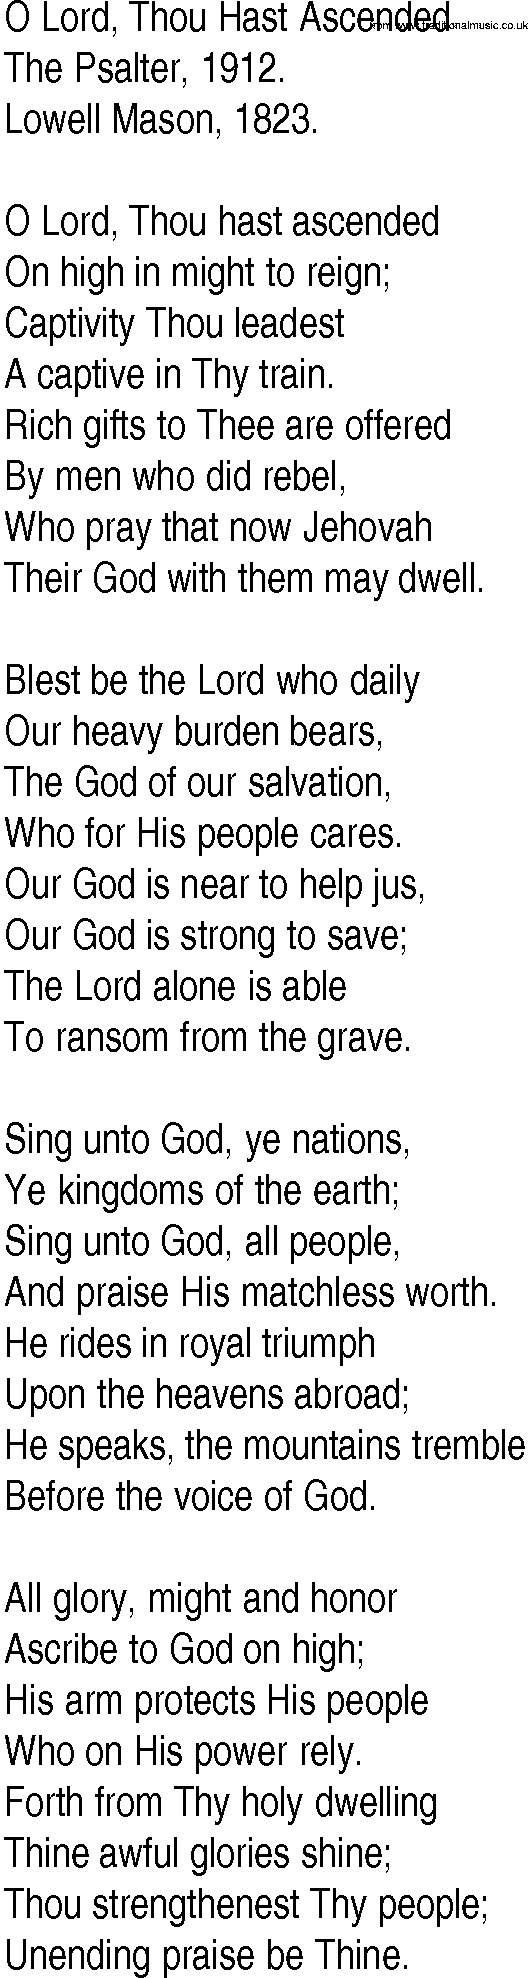 Hymn and Gospel Song: O Lord, Thou Hast Ascended by The Psalter lyrics